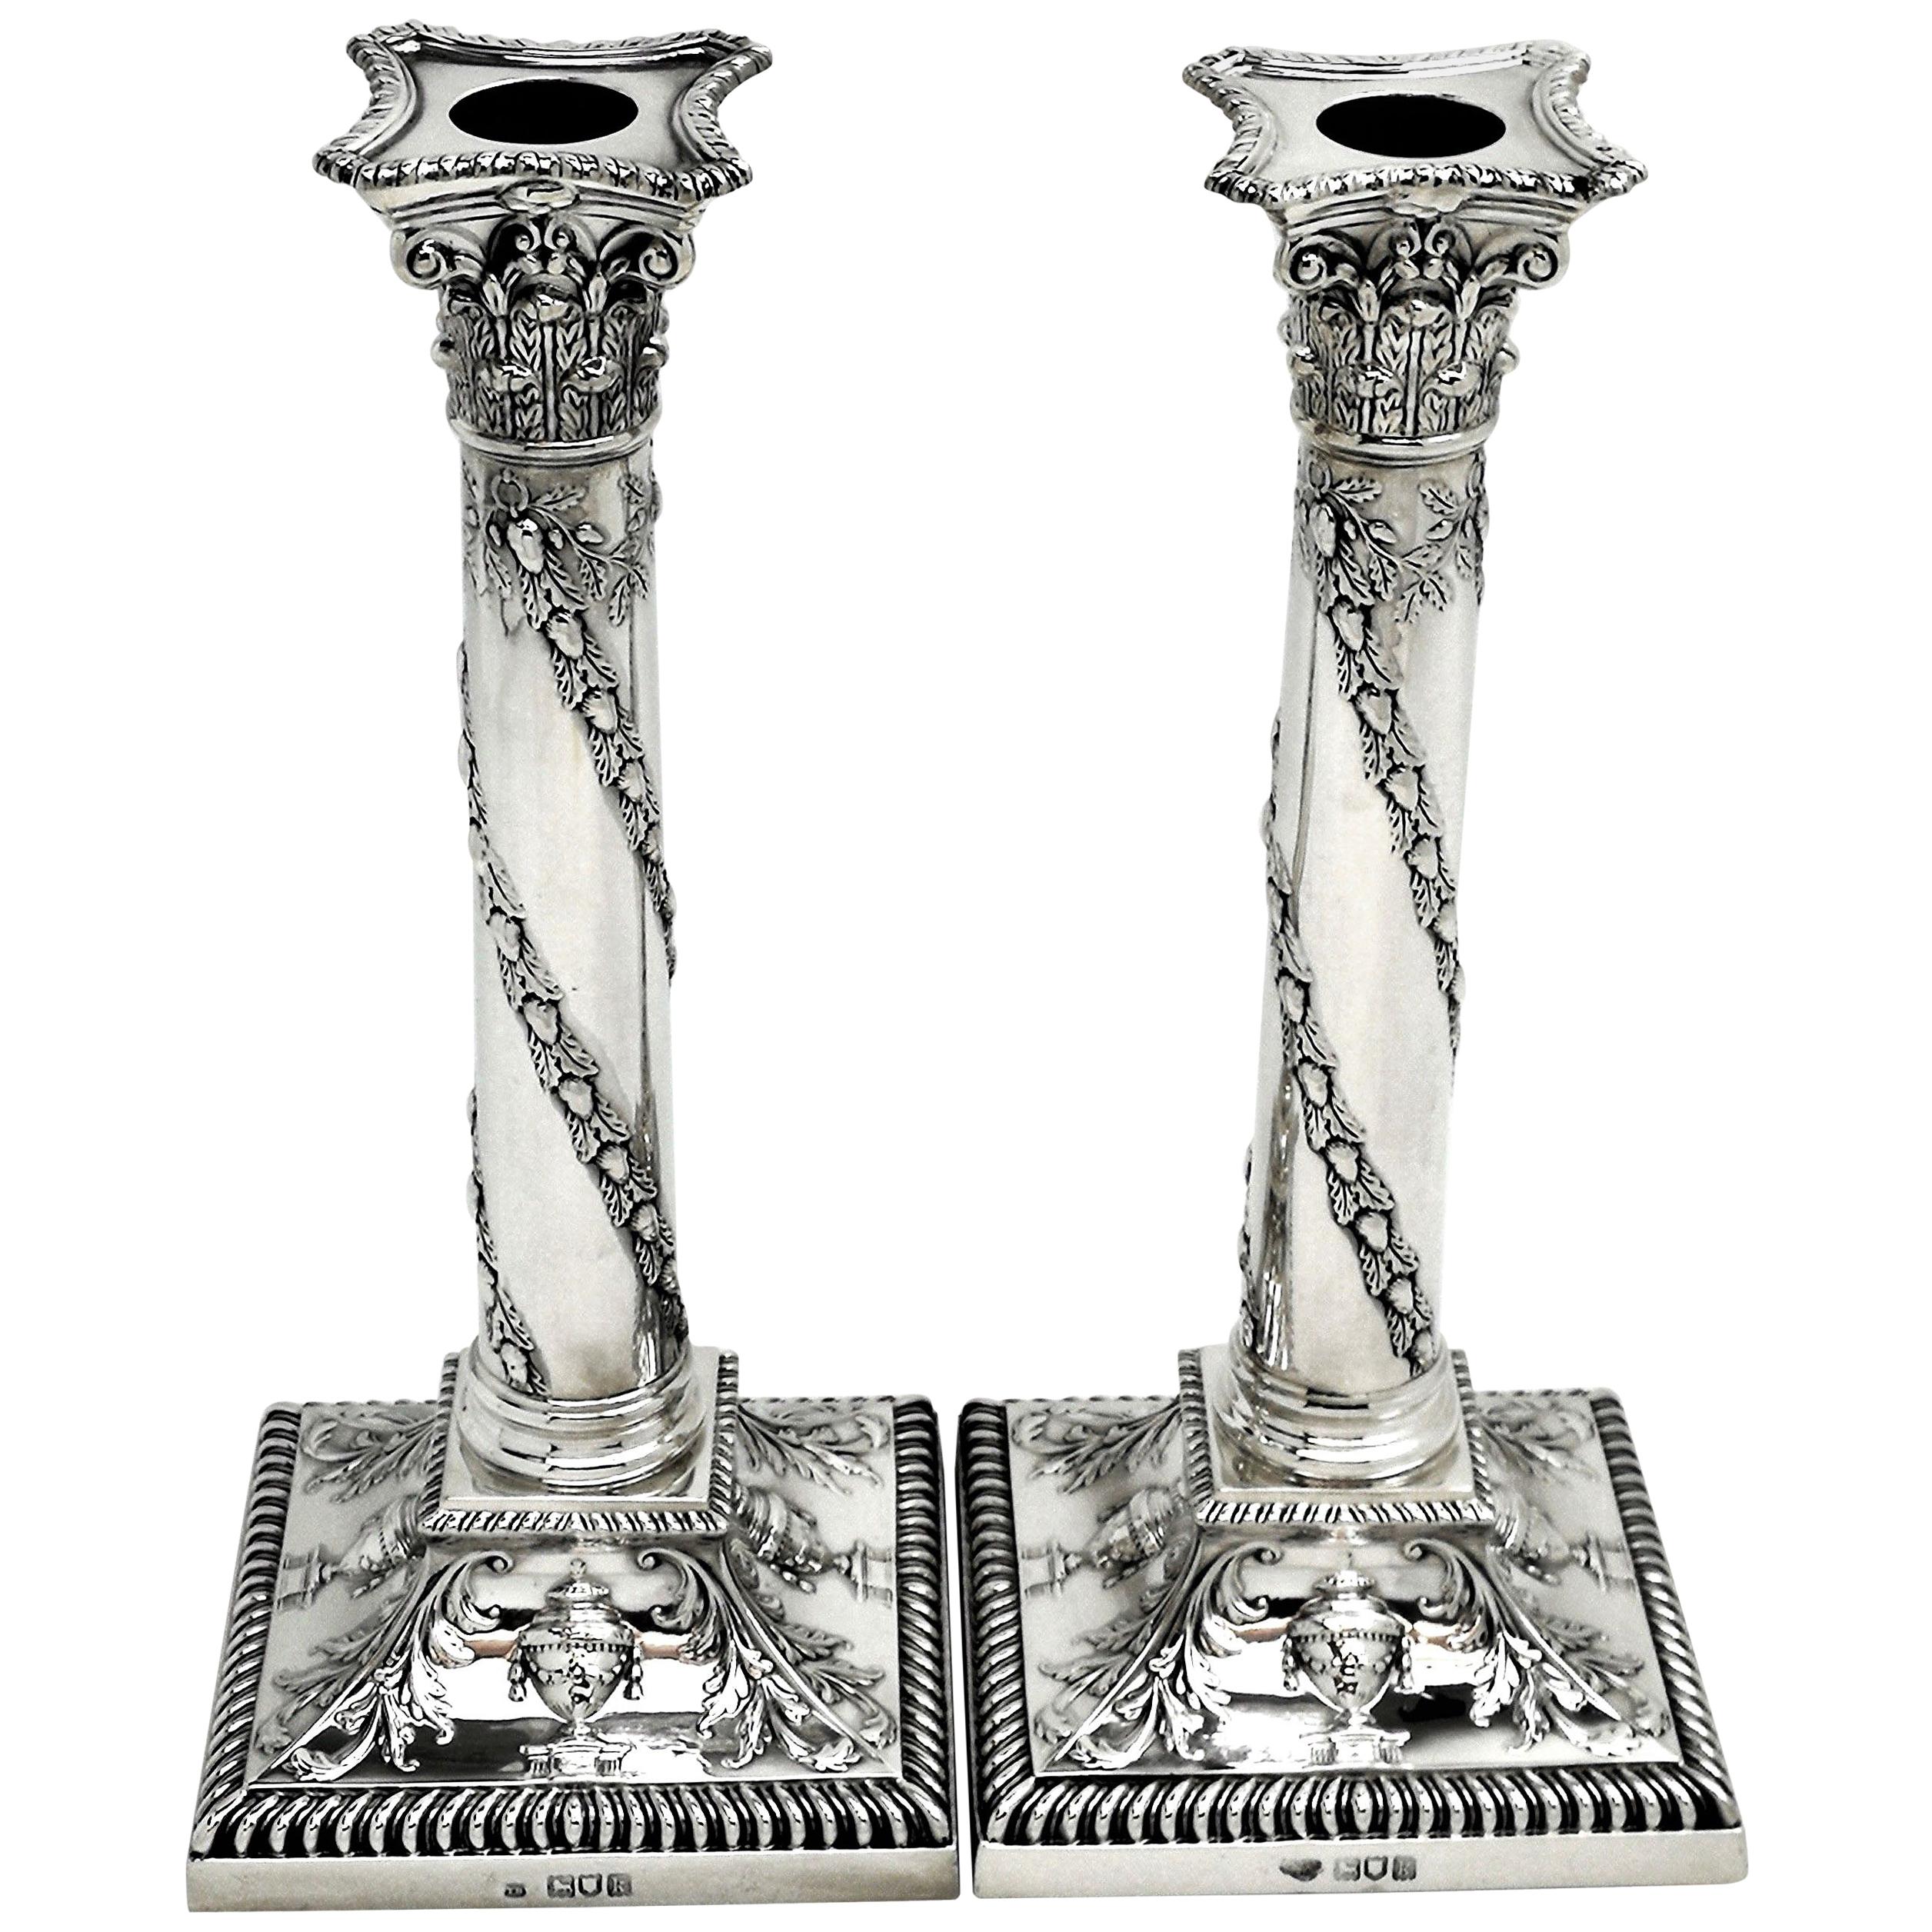 Pair of Antique Edwardian Sterling Silver Candlesticks, 1905